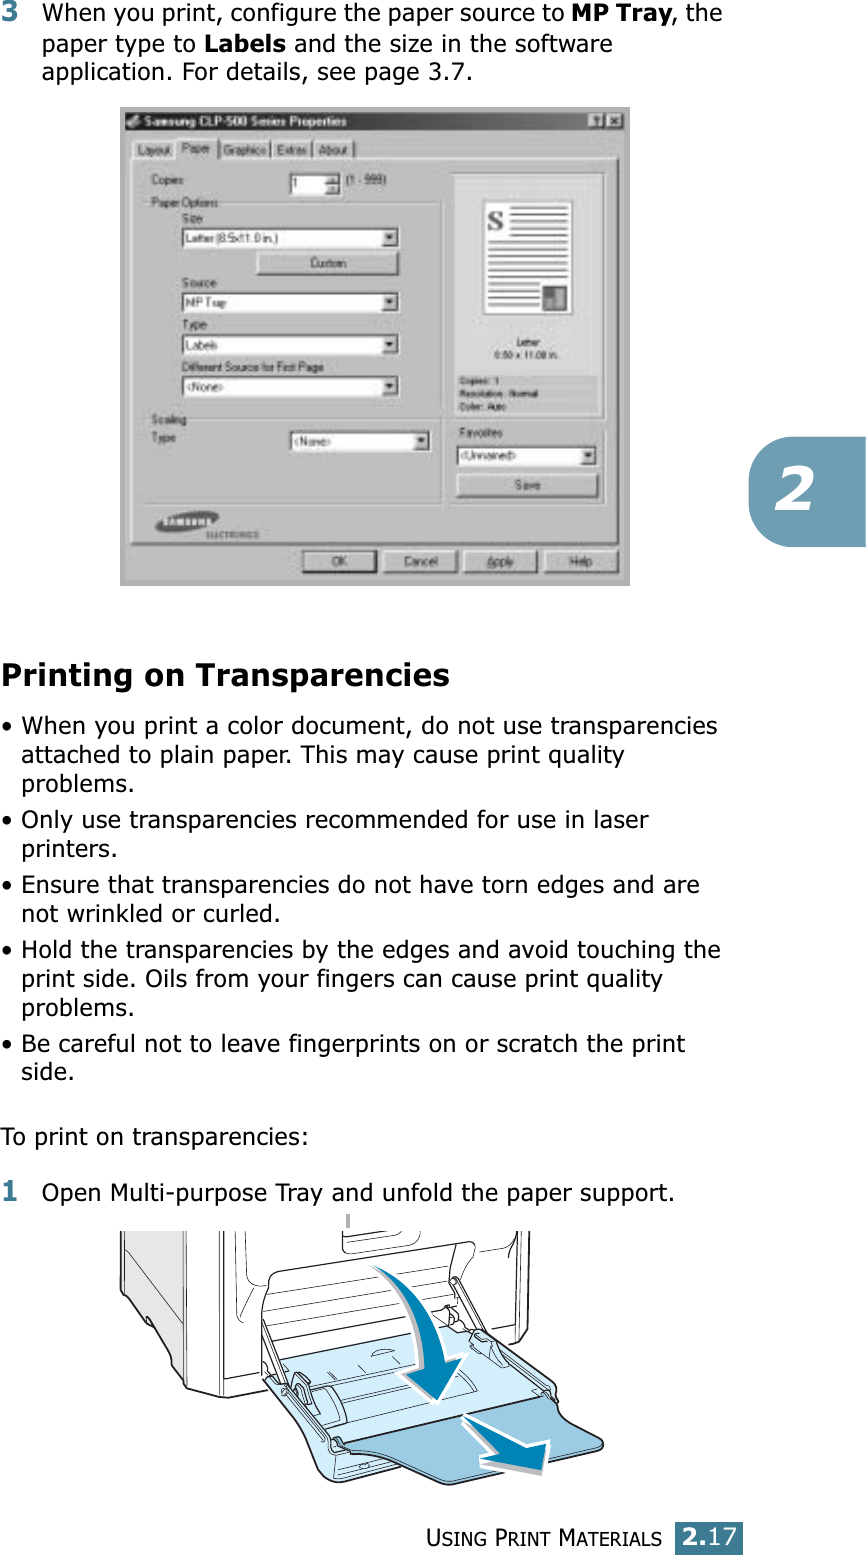 USING PRINT MATERIALS2.1723When you print, configure the paper source to MP Tray, the paper type to Labels and the size in the software application. For details, see page 3.7. Printing on Transparencies• When you print a color document, do not use transparencies attached to plain paper. This may cause print quality problems.• Only use transparencies recommended for use in laser printers.• Ensure that transparencies do not have torn edges and are not wrinkled or curled.• Hold the transparencies by the edges and avoid touching the print side. Oils from your fingers can cause print quality problems.• Be careful not to leave fingerprints on or scratch the print side.To print on transparencies:1Open Multi-purpose Tray and unfold the paper support.